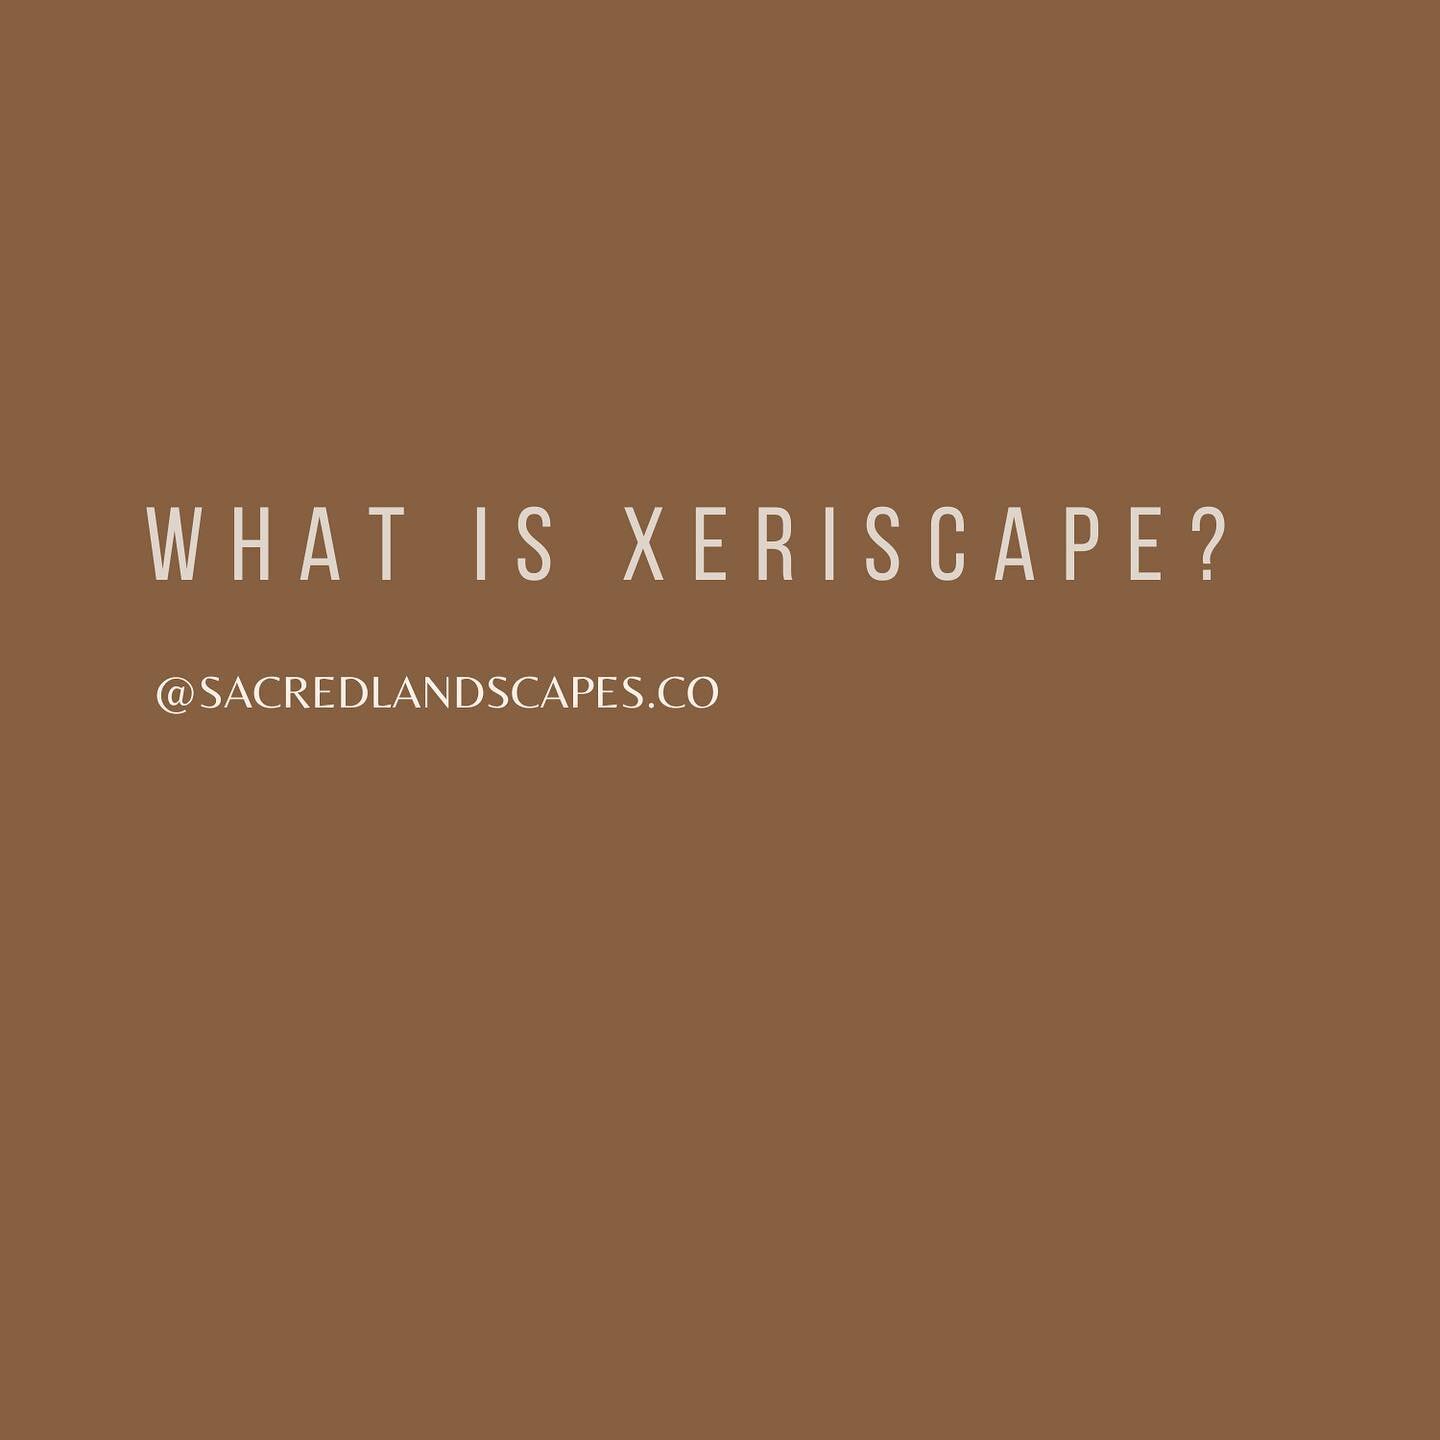 Some people within our community have asked me, &quot;What is xeriscape?&quot;
and the overall meaning behind it is about the water, and the land. 

Xeriscape is type of landscape design that uses little to no irrigation. 

Mimicking a desert type cl